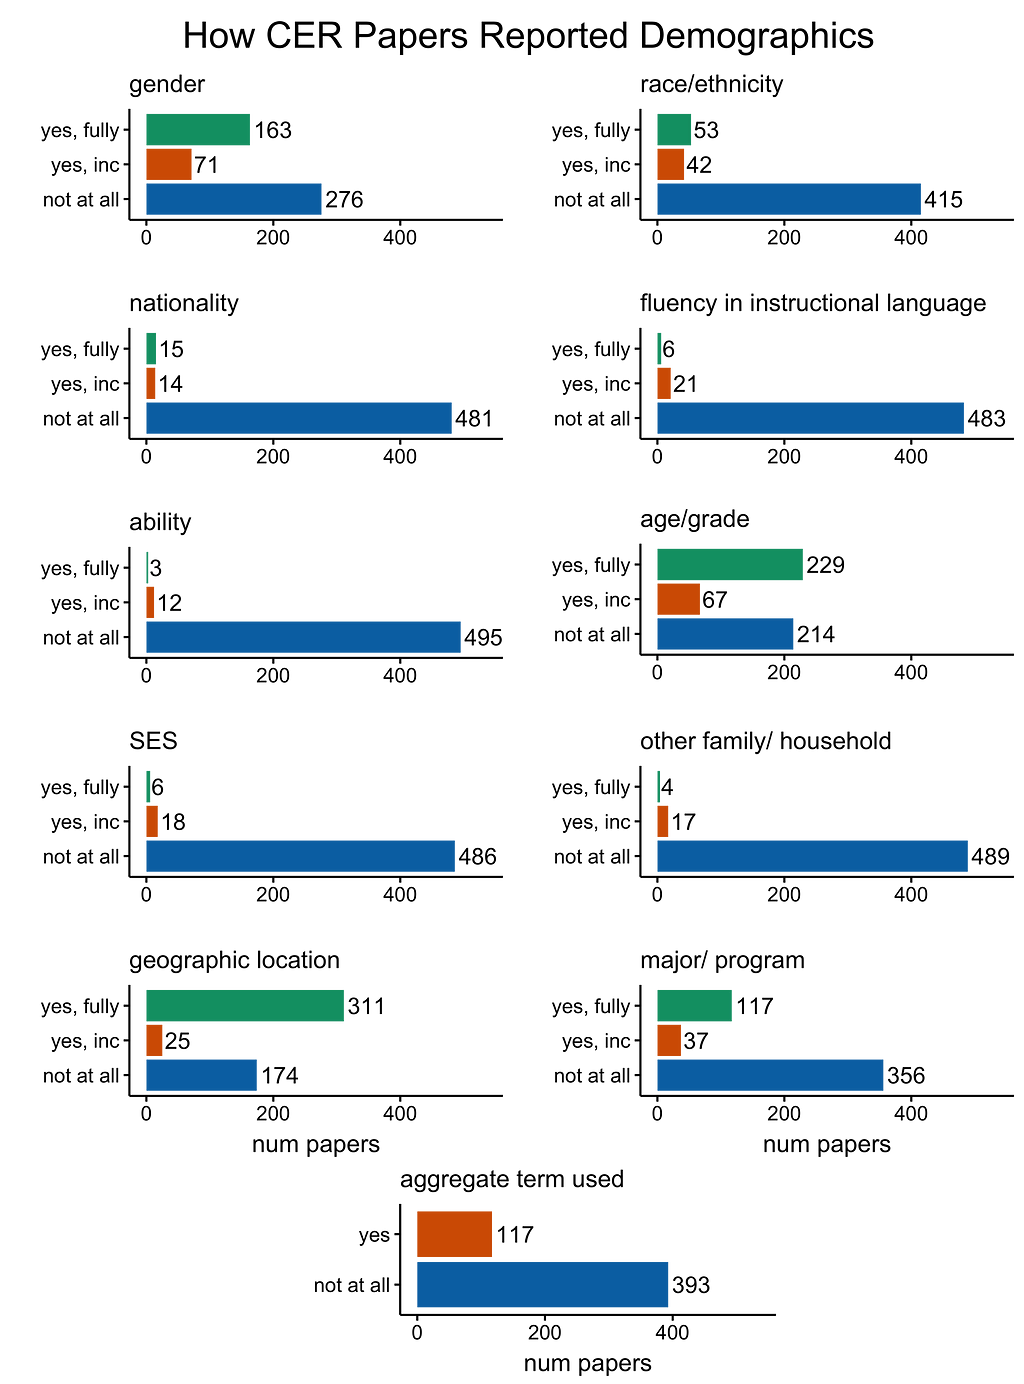 A series of 11 horizontal bar charts about how CER papers reported demographics. The charts are titled with the 11 demographics we coded for and the first 10 have categories of “yes fully” “yes incomplete” and “not at all”. Most charts show that demographics were rarely reported (large “not at all” bars). Exceptions are gender, which was reported in 234 papers, age/grade reported in 296 papers, major/program reported in 154 papers, and geographic location reported in 336 papers. The last chart i